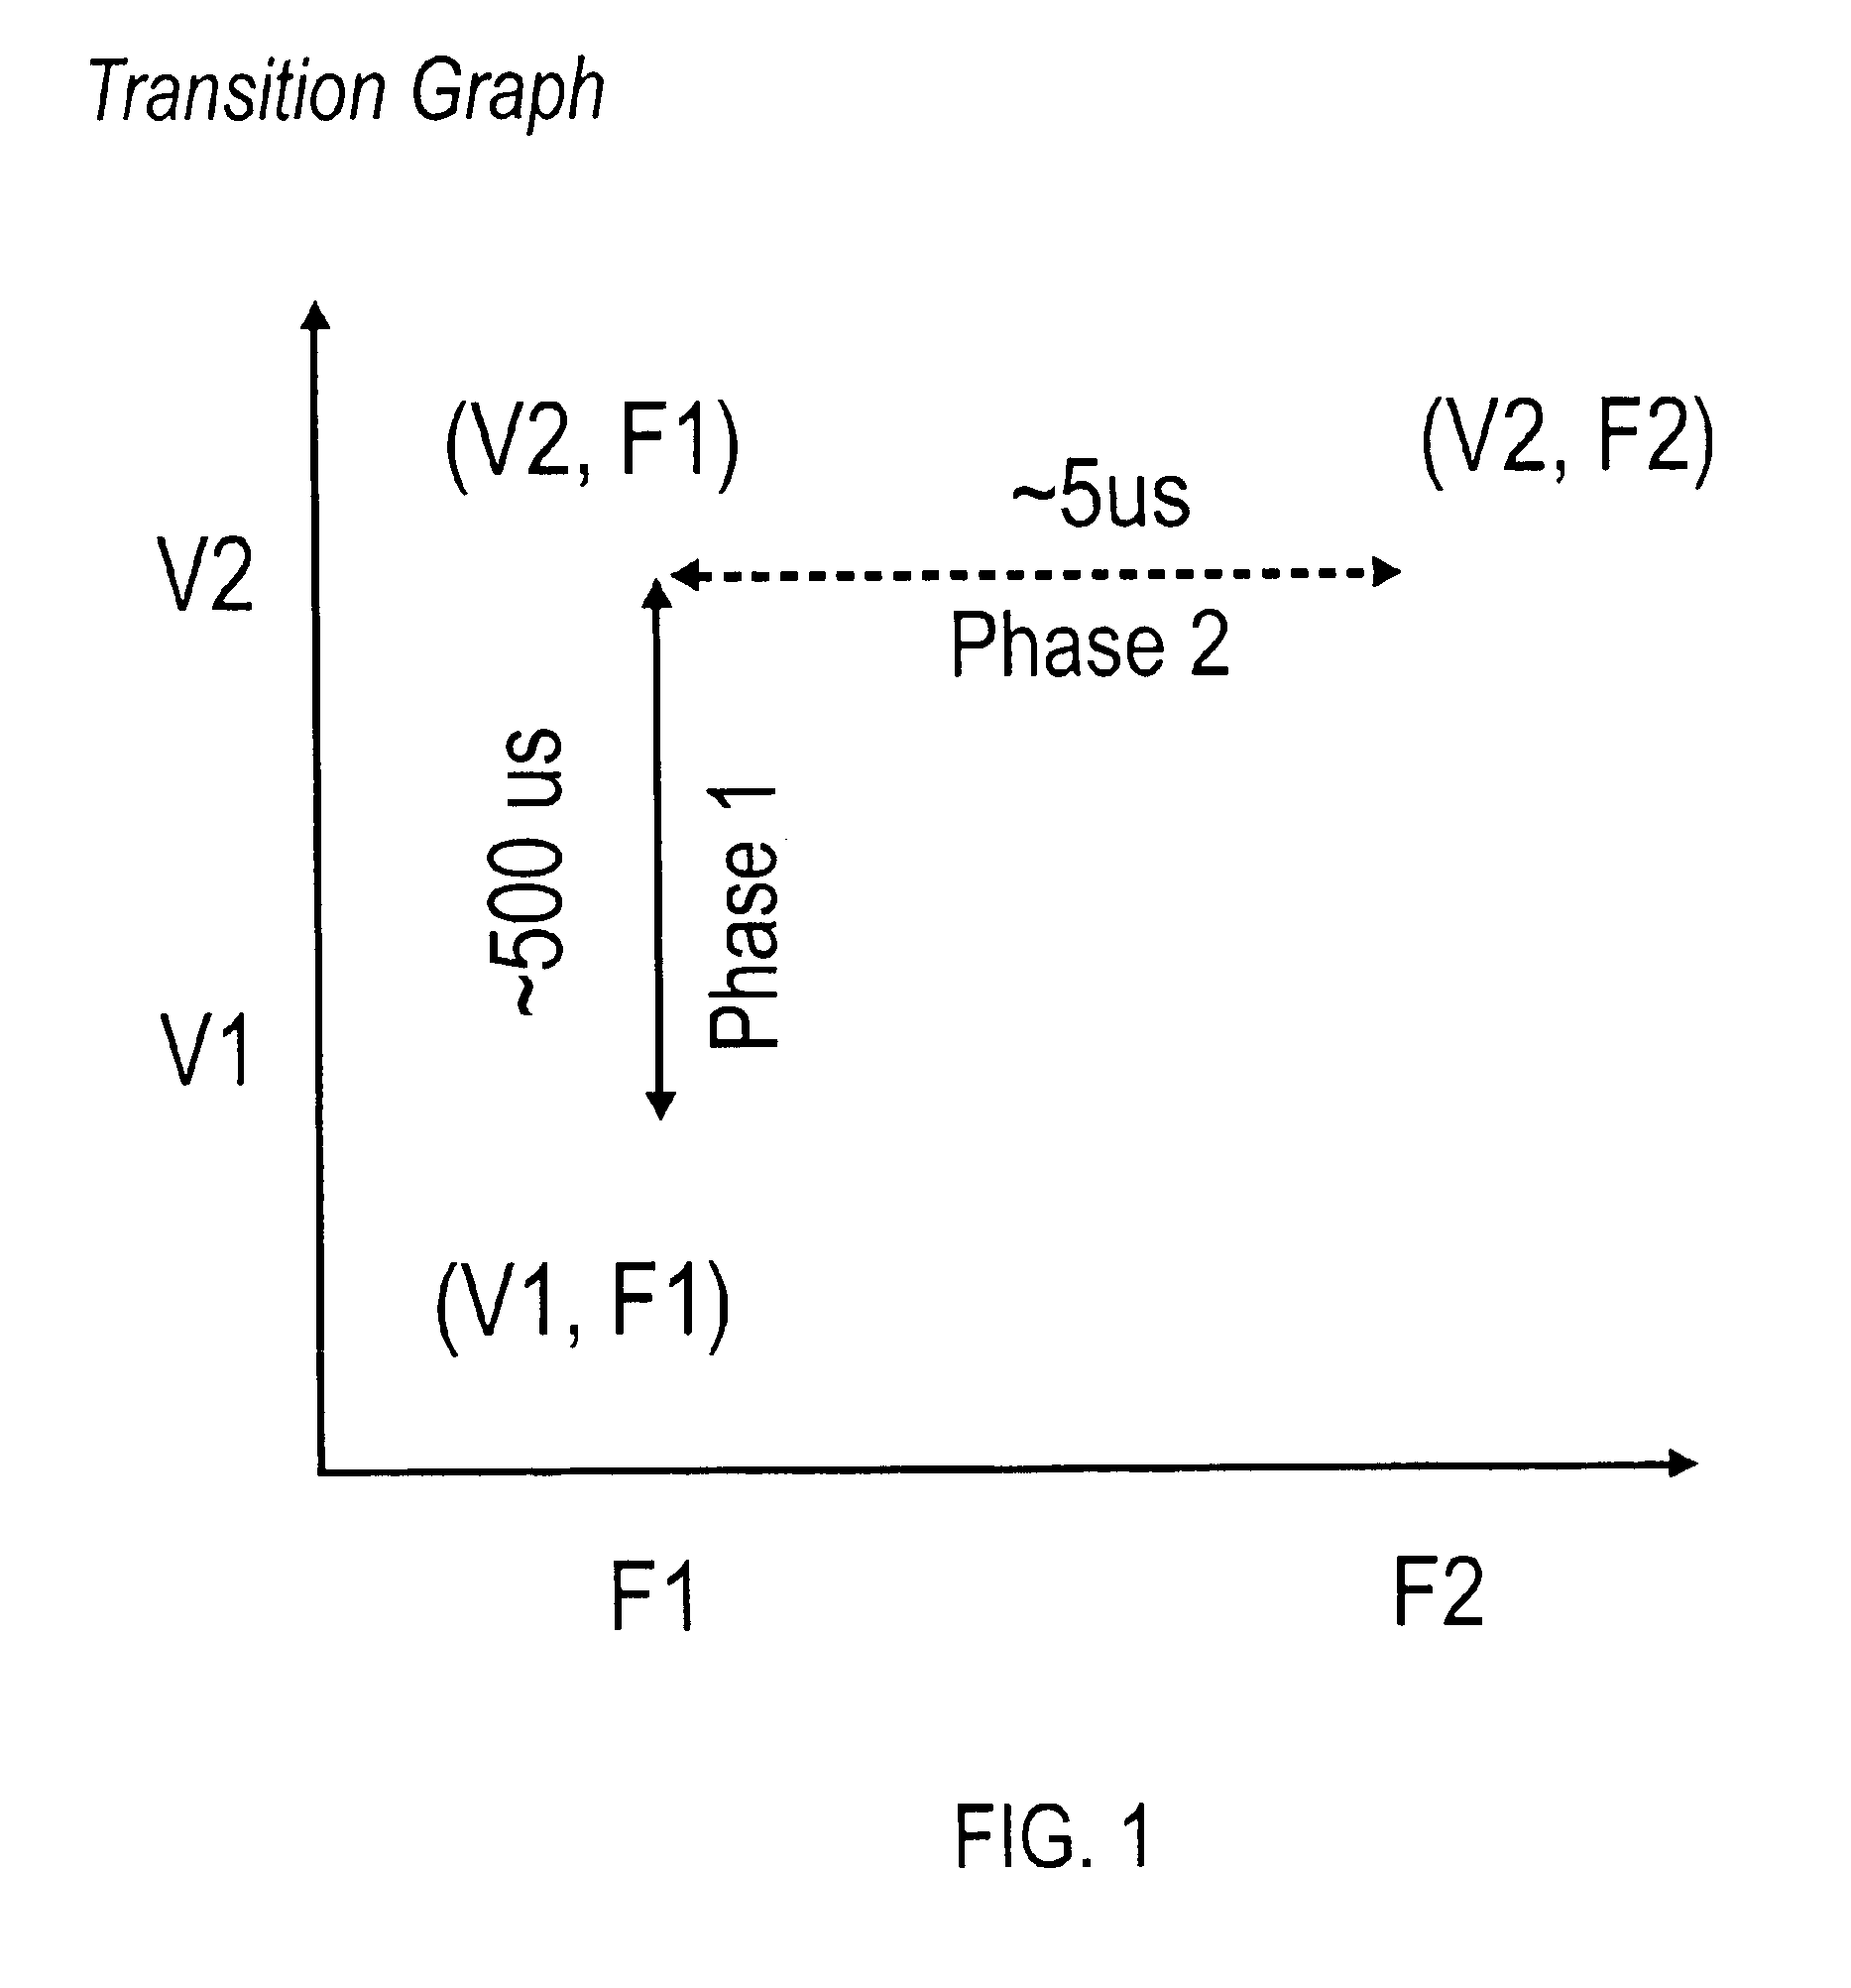 Method and apparatus for transitioning a processor state from a first performance mode to a second performance mode